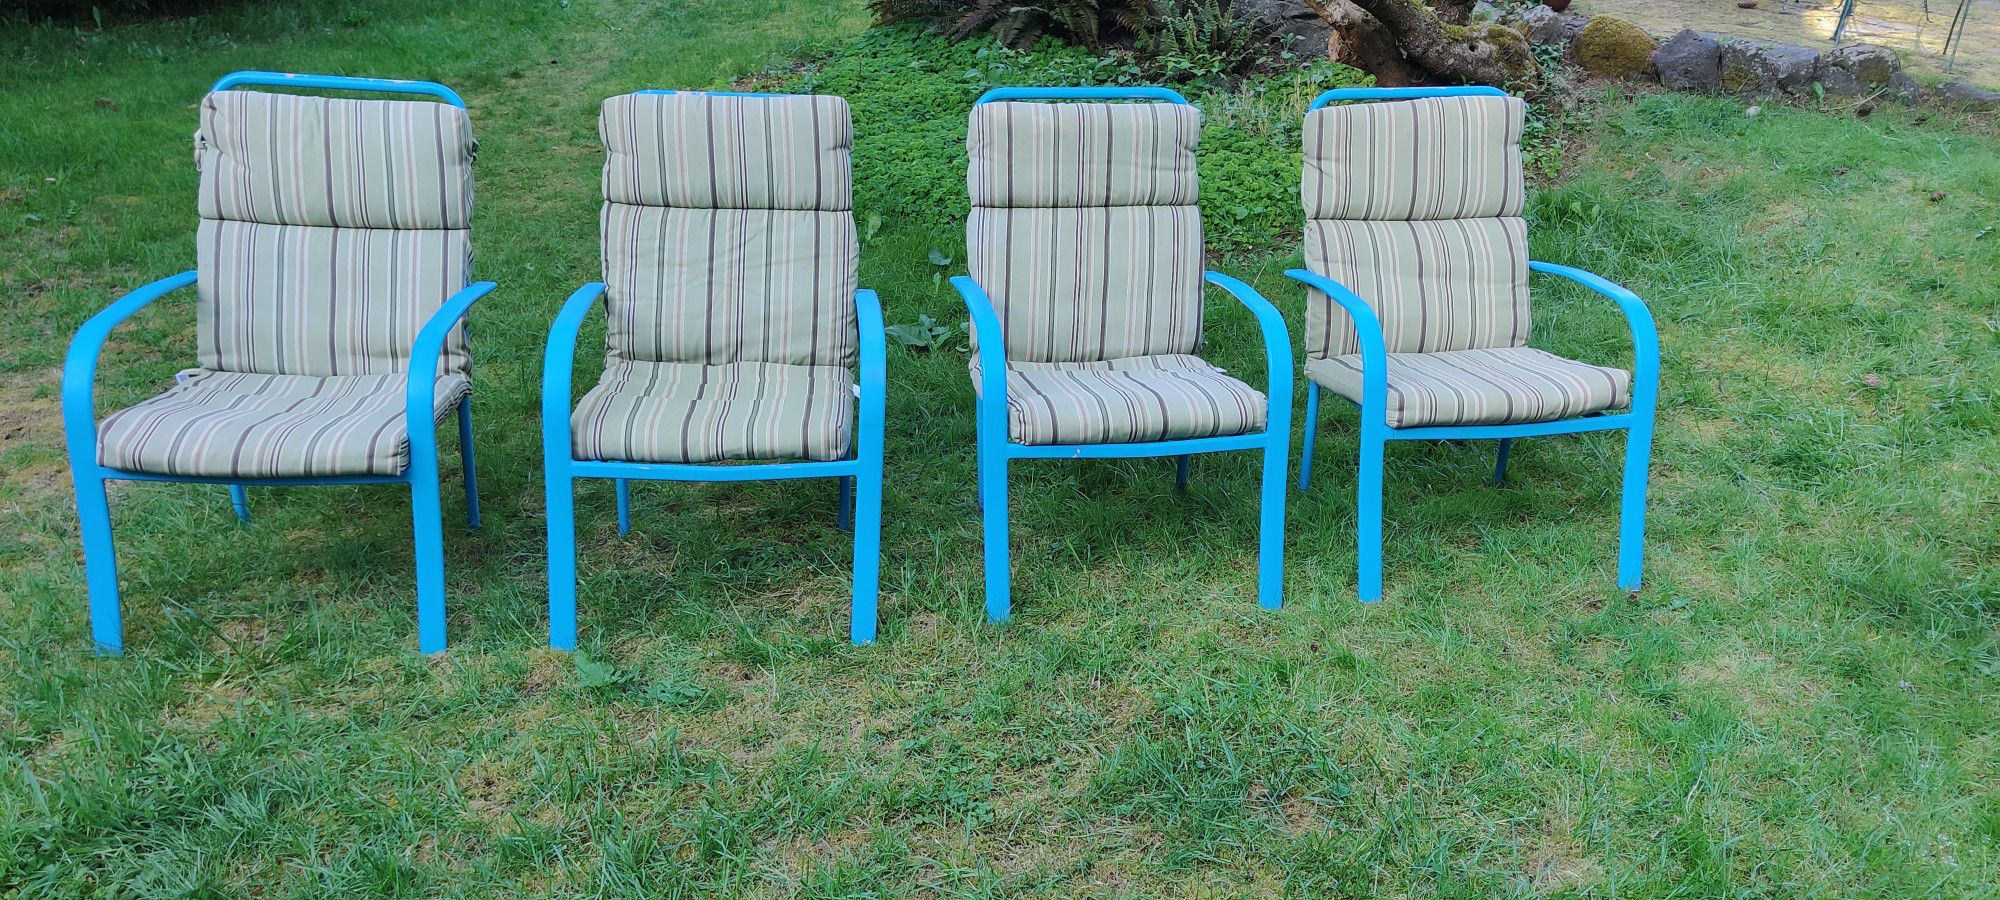 4 Outdoor Chairs With Cushions 